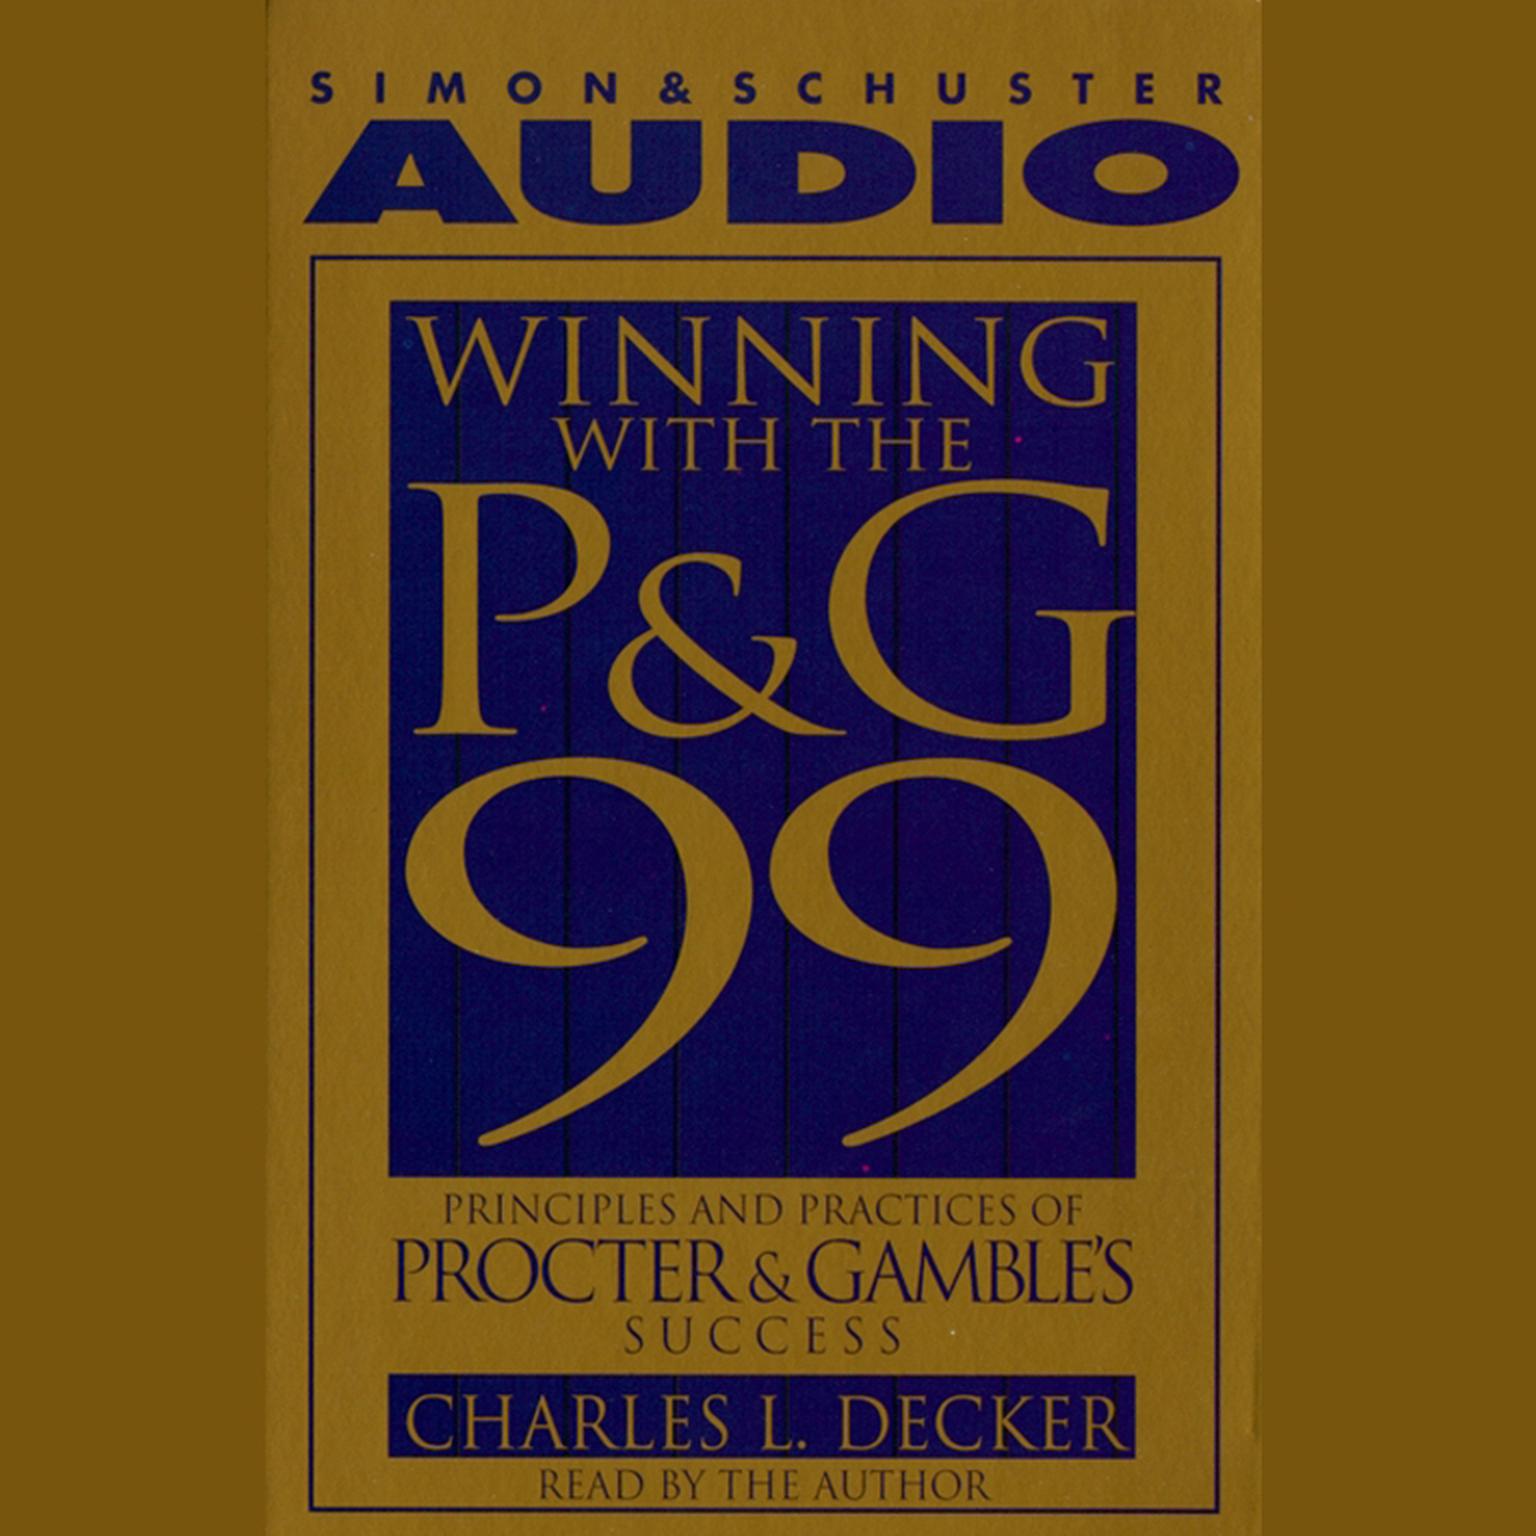 Winning With the P&G 99 (Abridged): Principles and Practices of Procter & Gambles Success Audiobook, by Charlie L. Decker